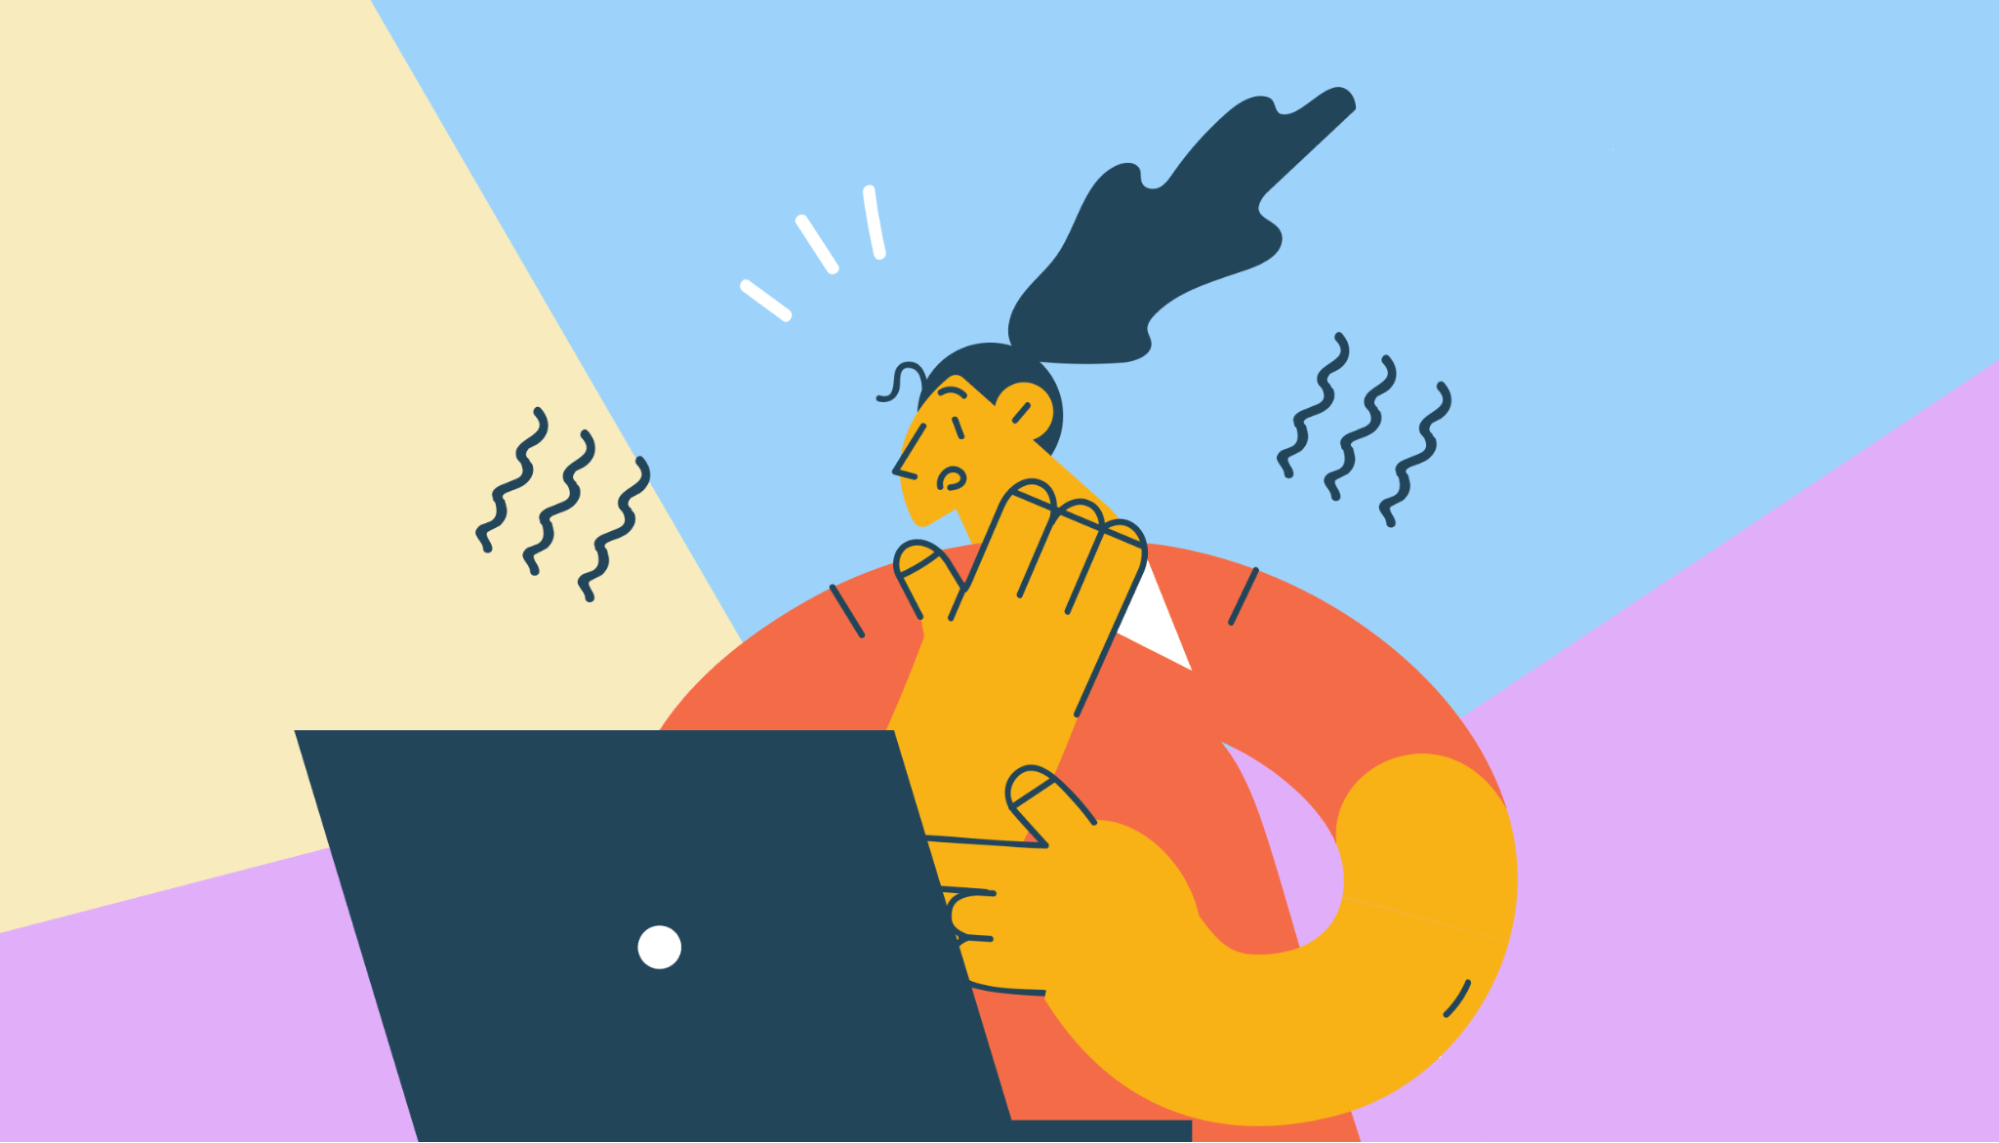 Illustration of stressed person on laptop